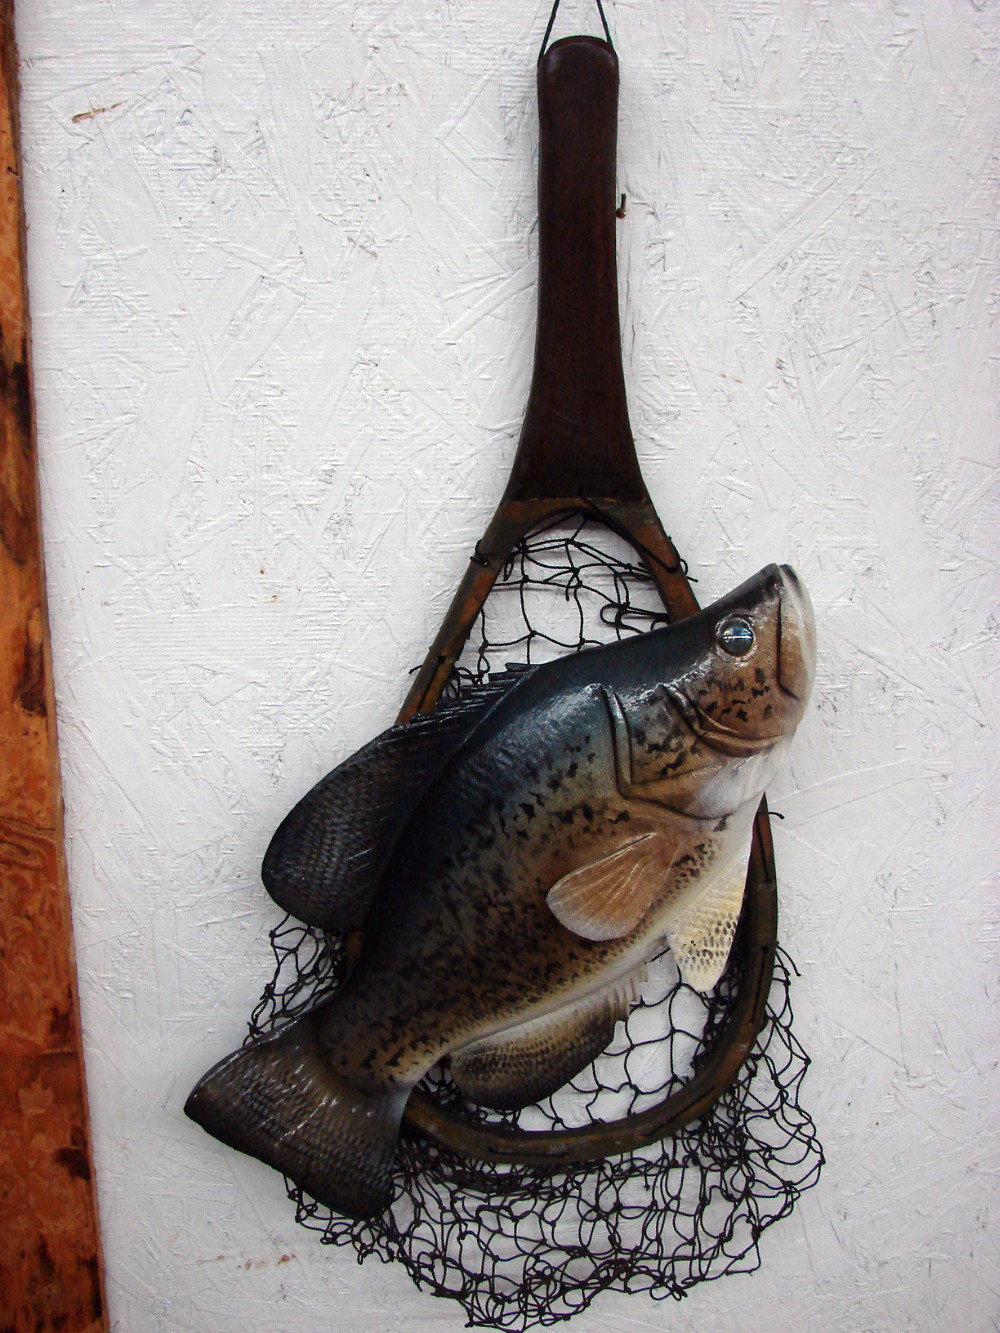 Casey Edwards Hand Carved Wood Panfish Trophy Crappie in Fishing Net